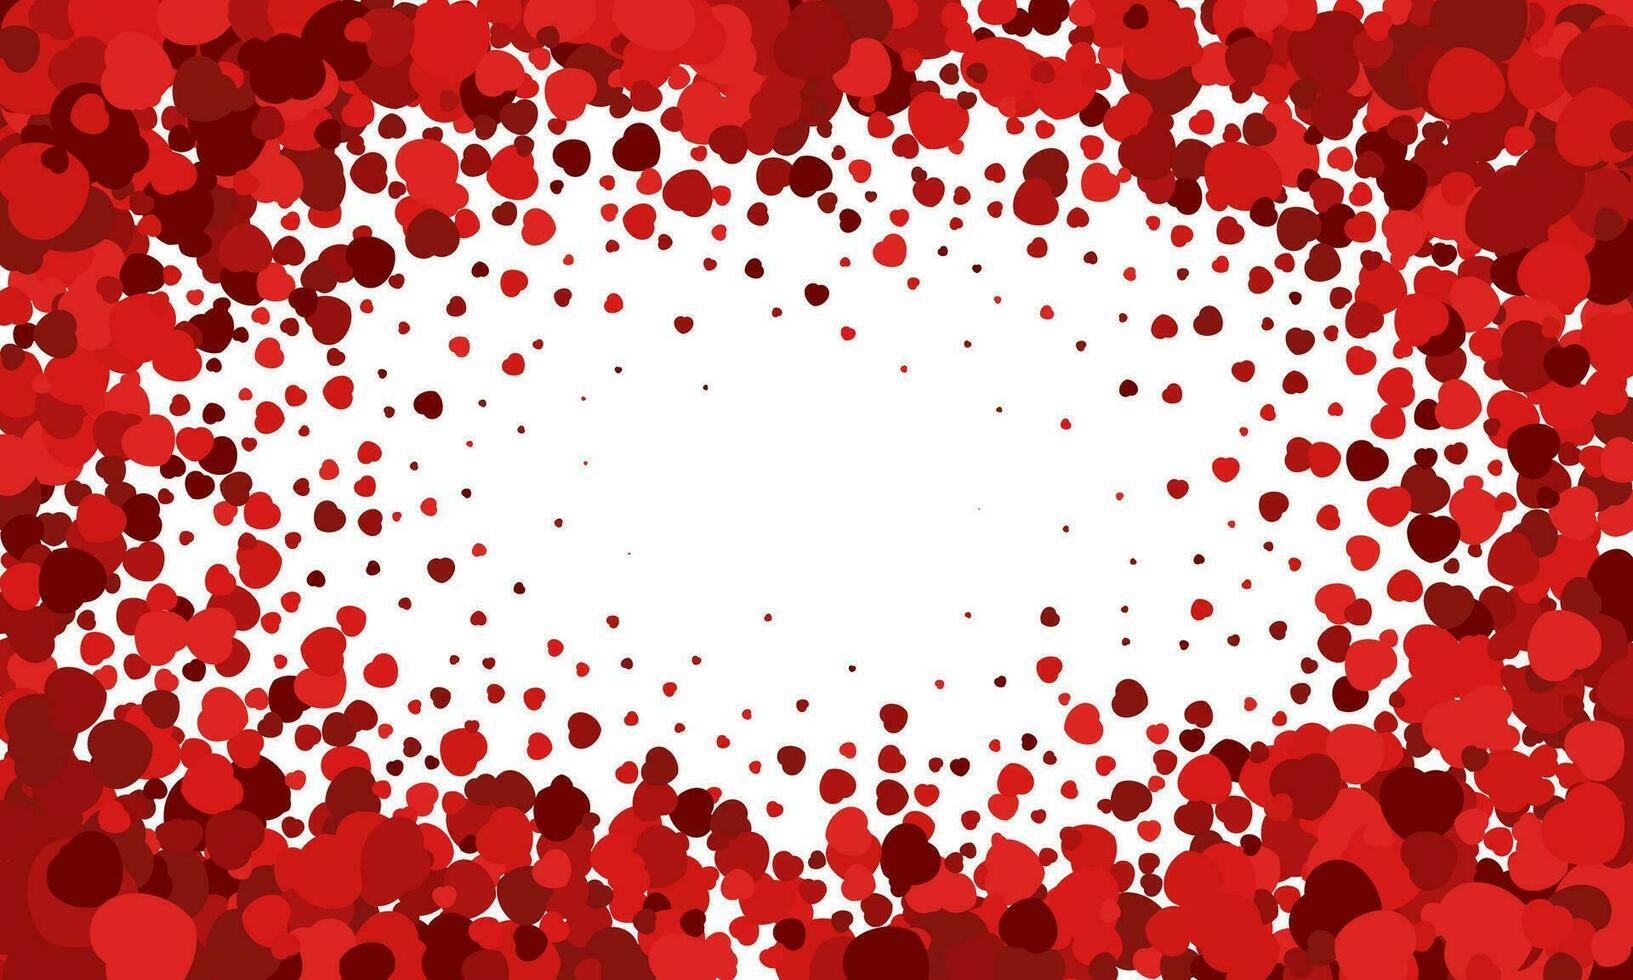 Happy Valentines Day Background. Abstract hearts for Valentines Day Background Design. Vector illustration.